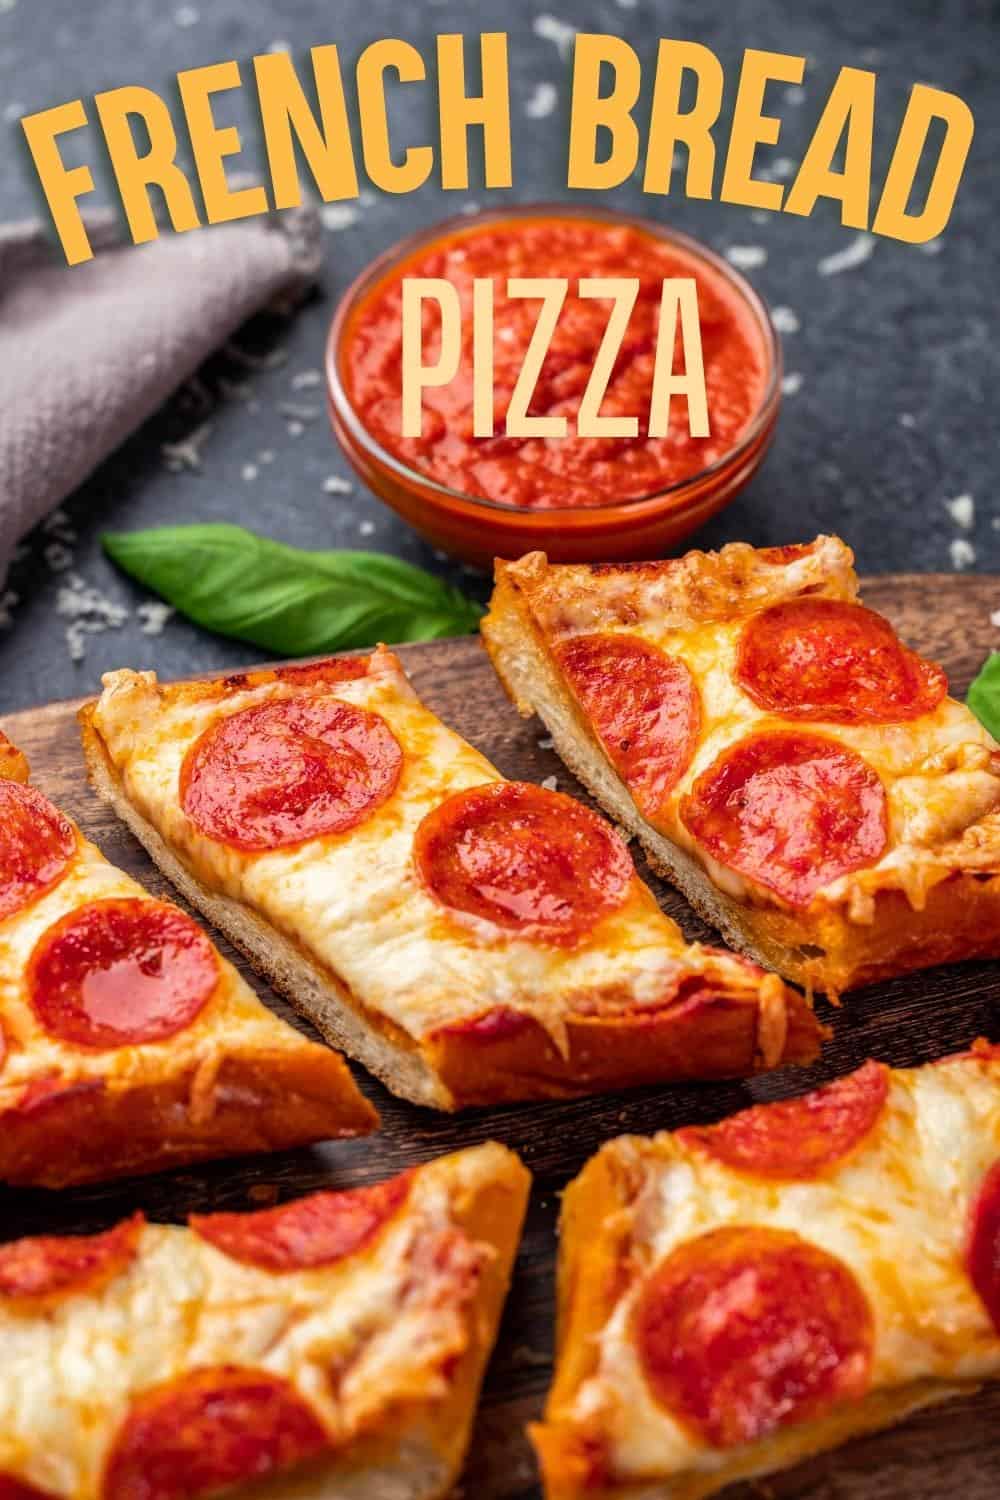 Pizza French Bread